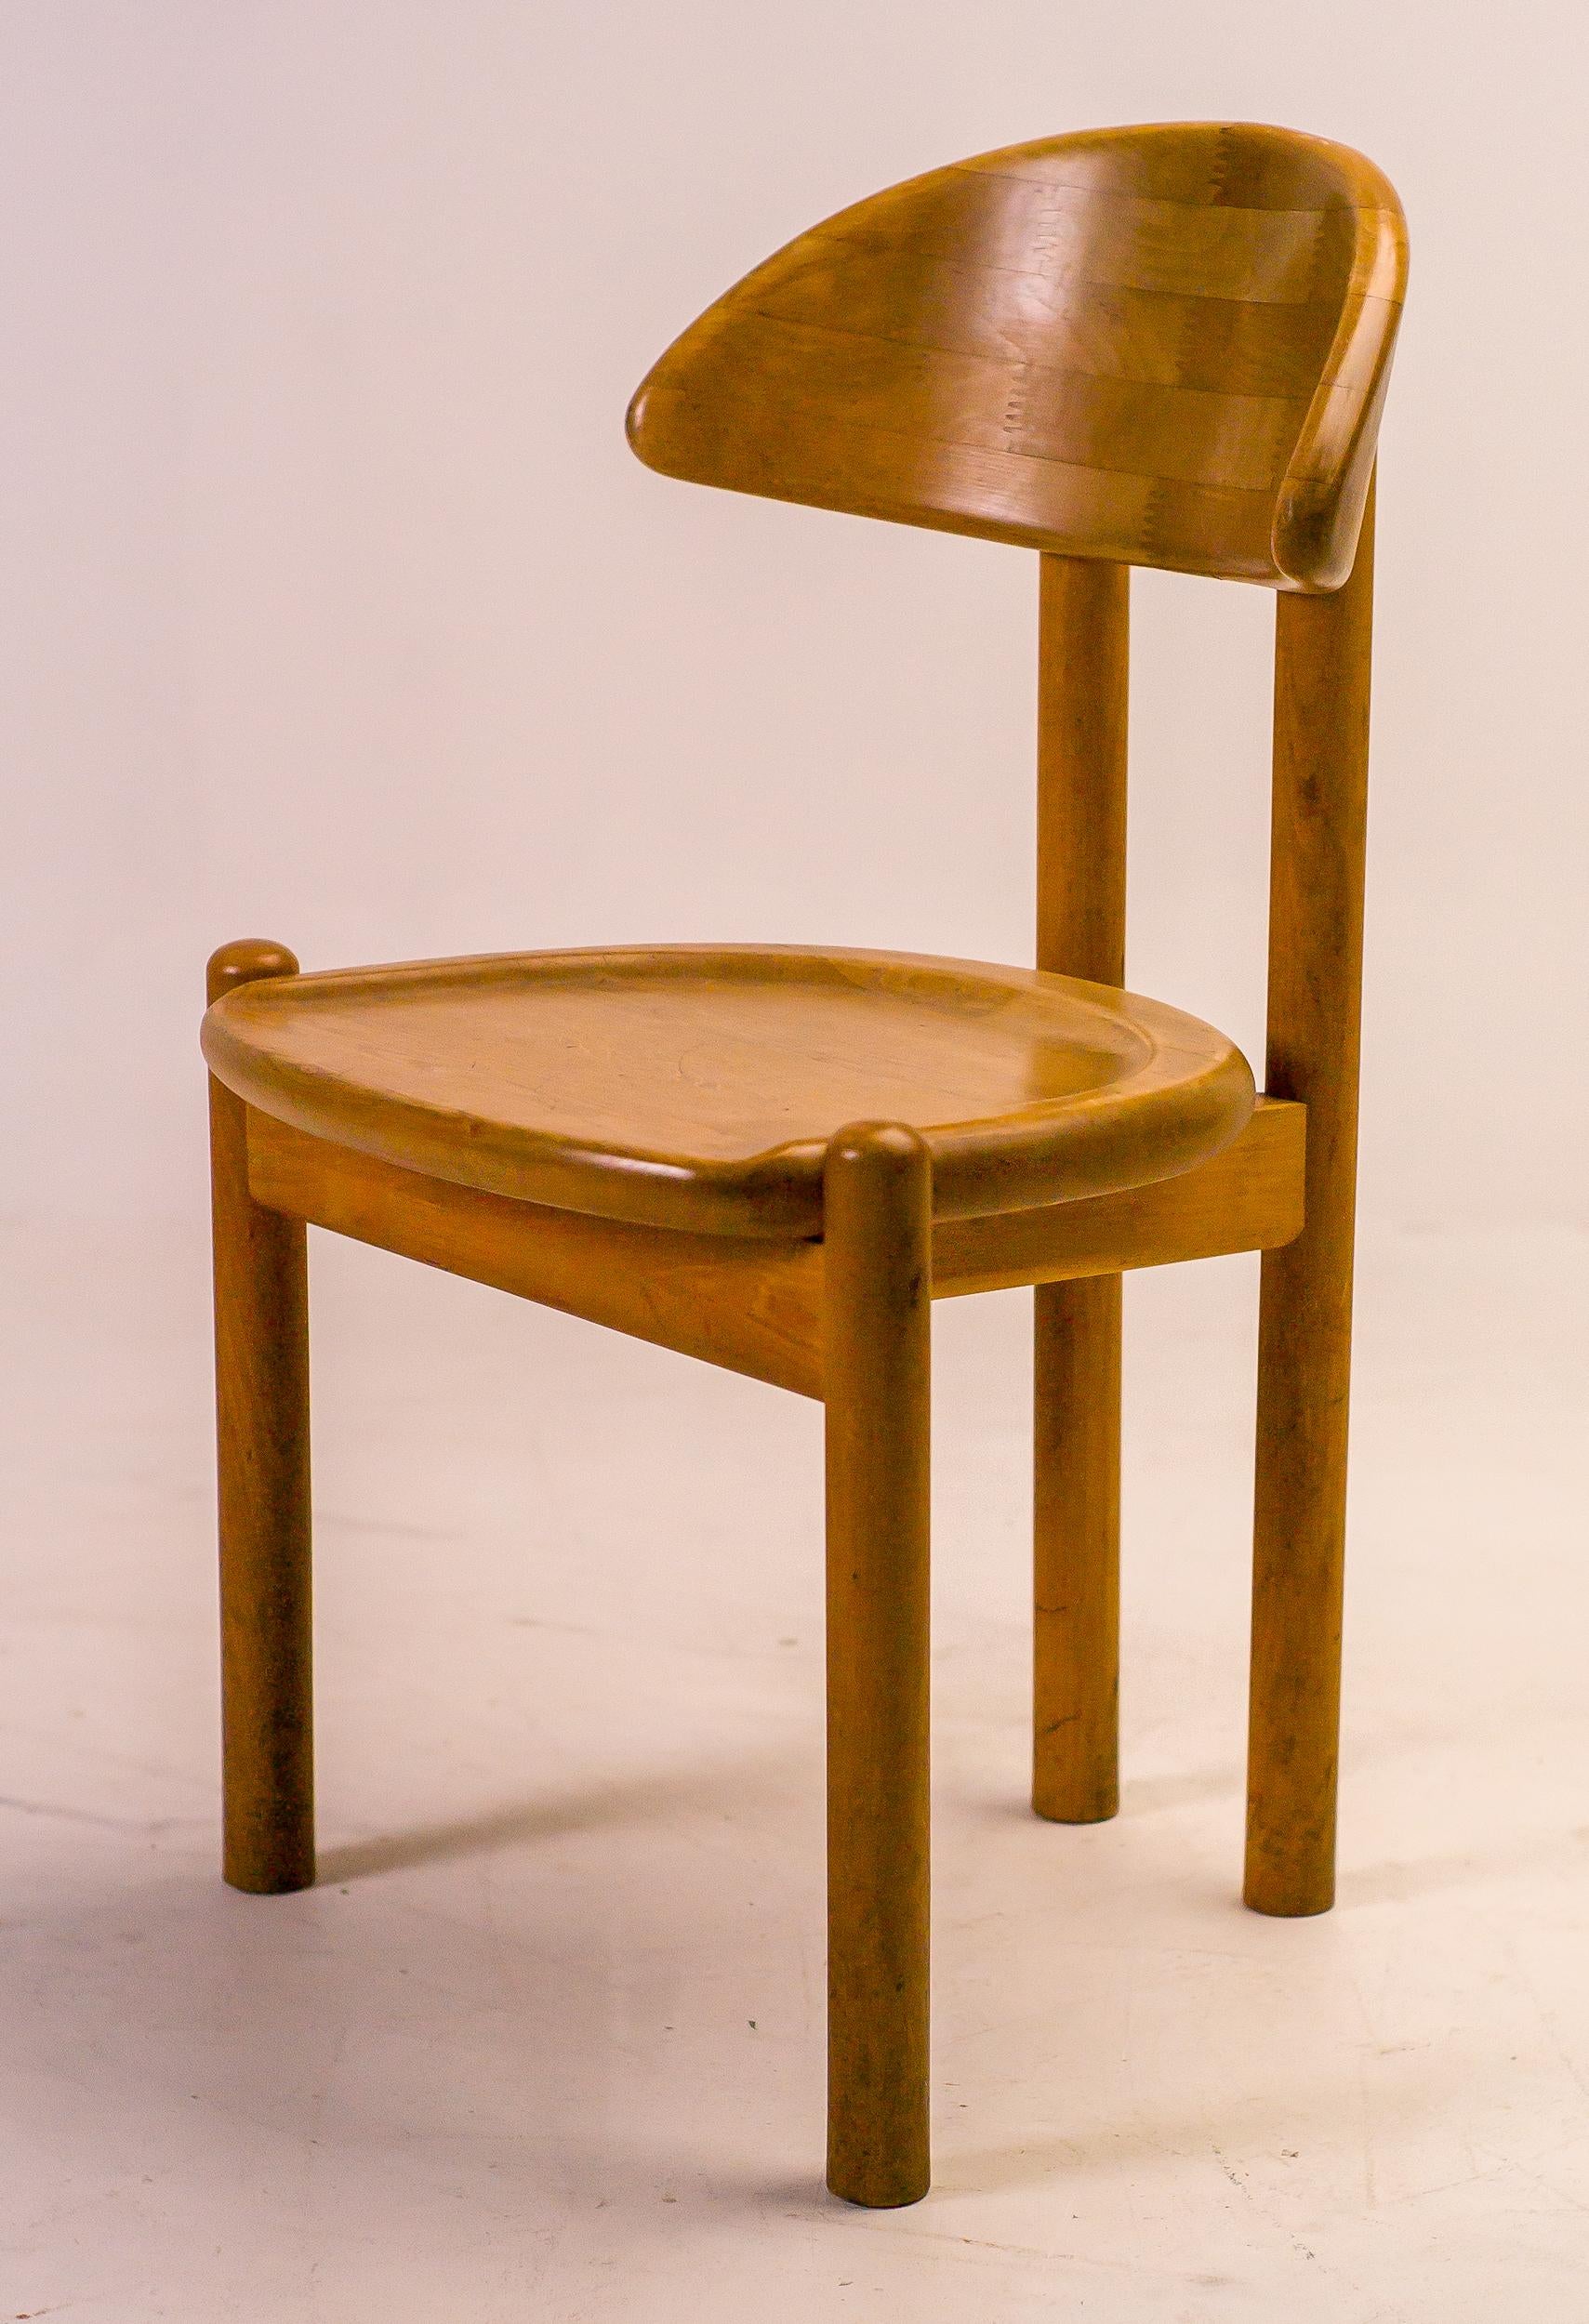 Sculptural organic chair made in solid maple by Ansager Møbler, Denmark.
Danish craftsmanship, marked with Ansager stamp.

Ansager, Denmark, is synonymous with exceptional craftsmanship and Scandinavian design. With a rich heritage dating back